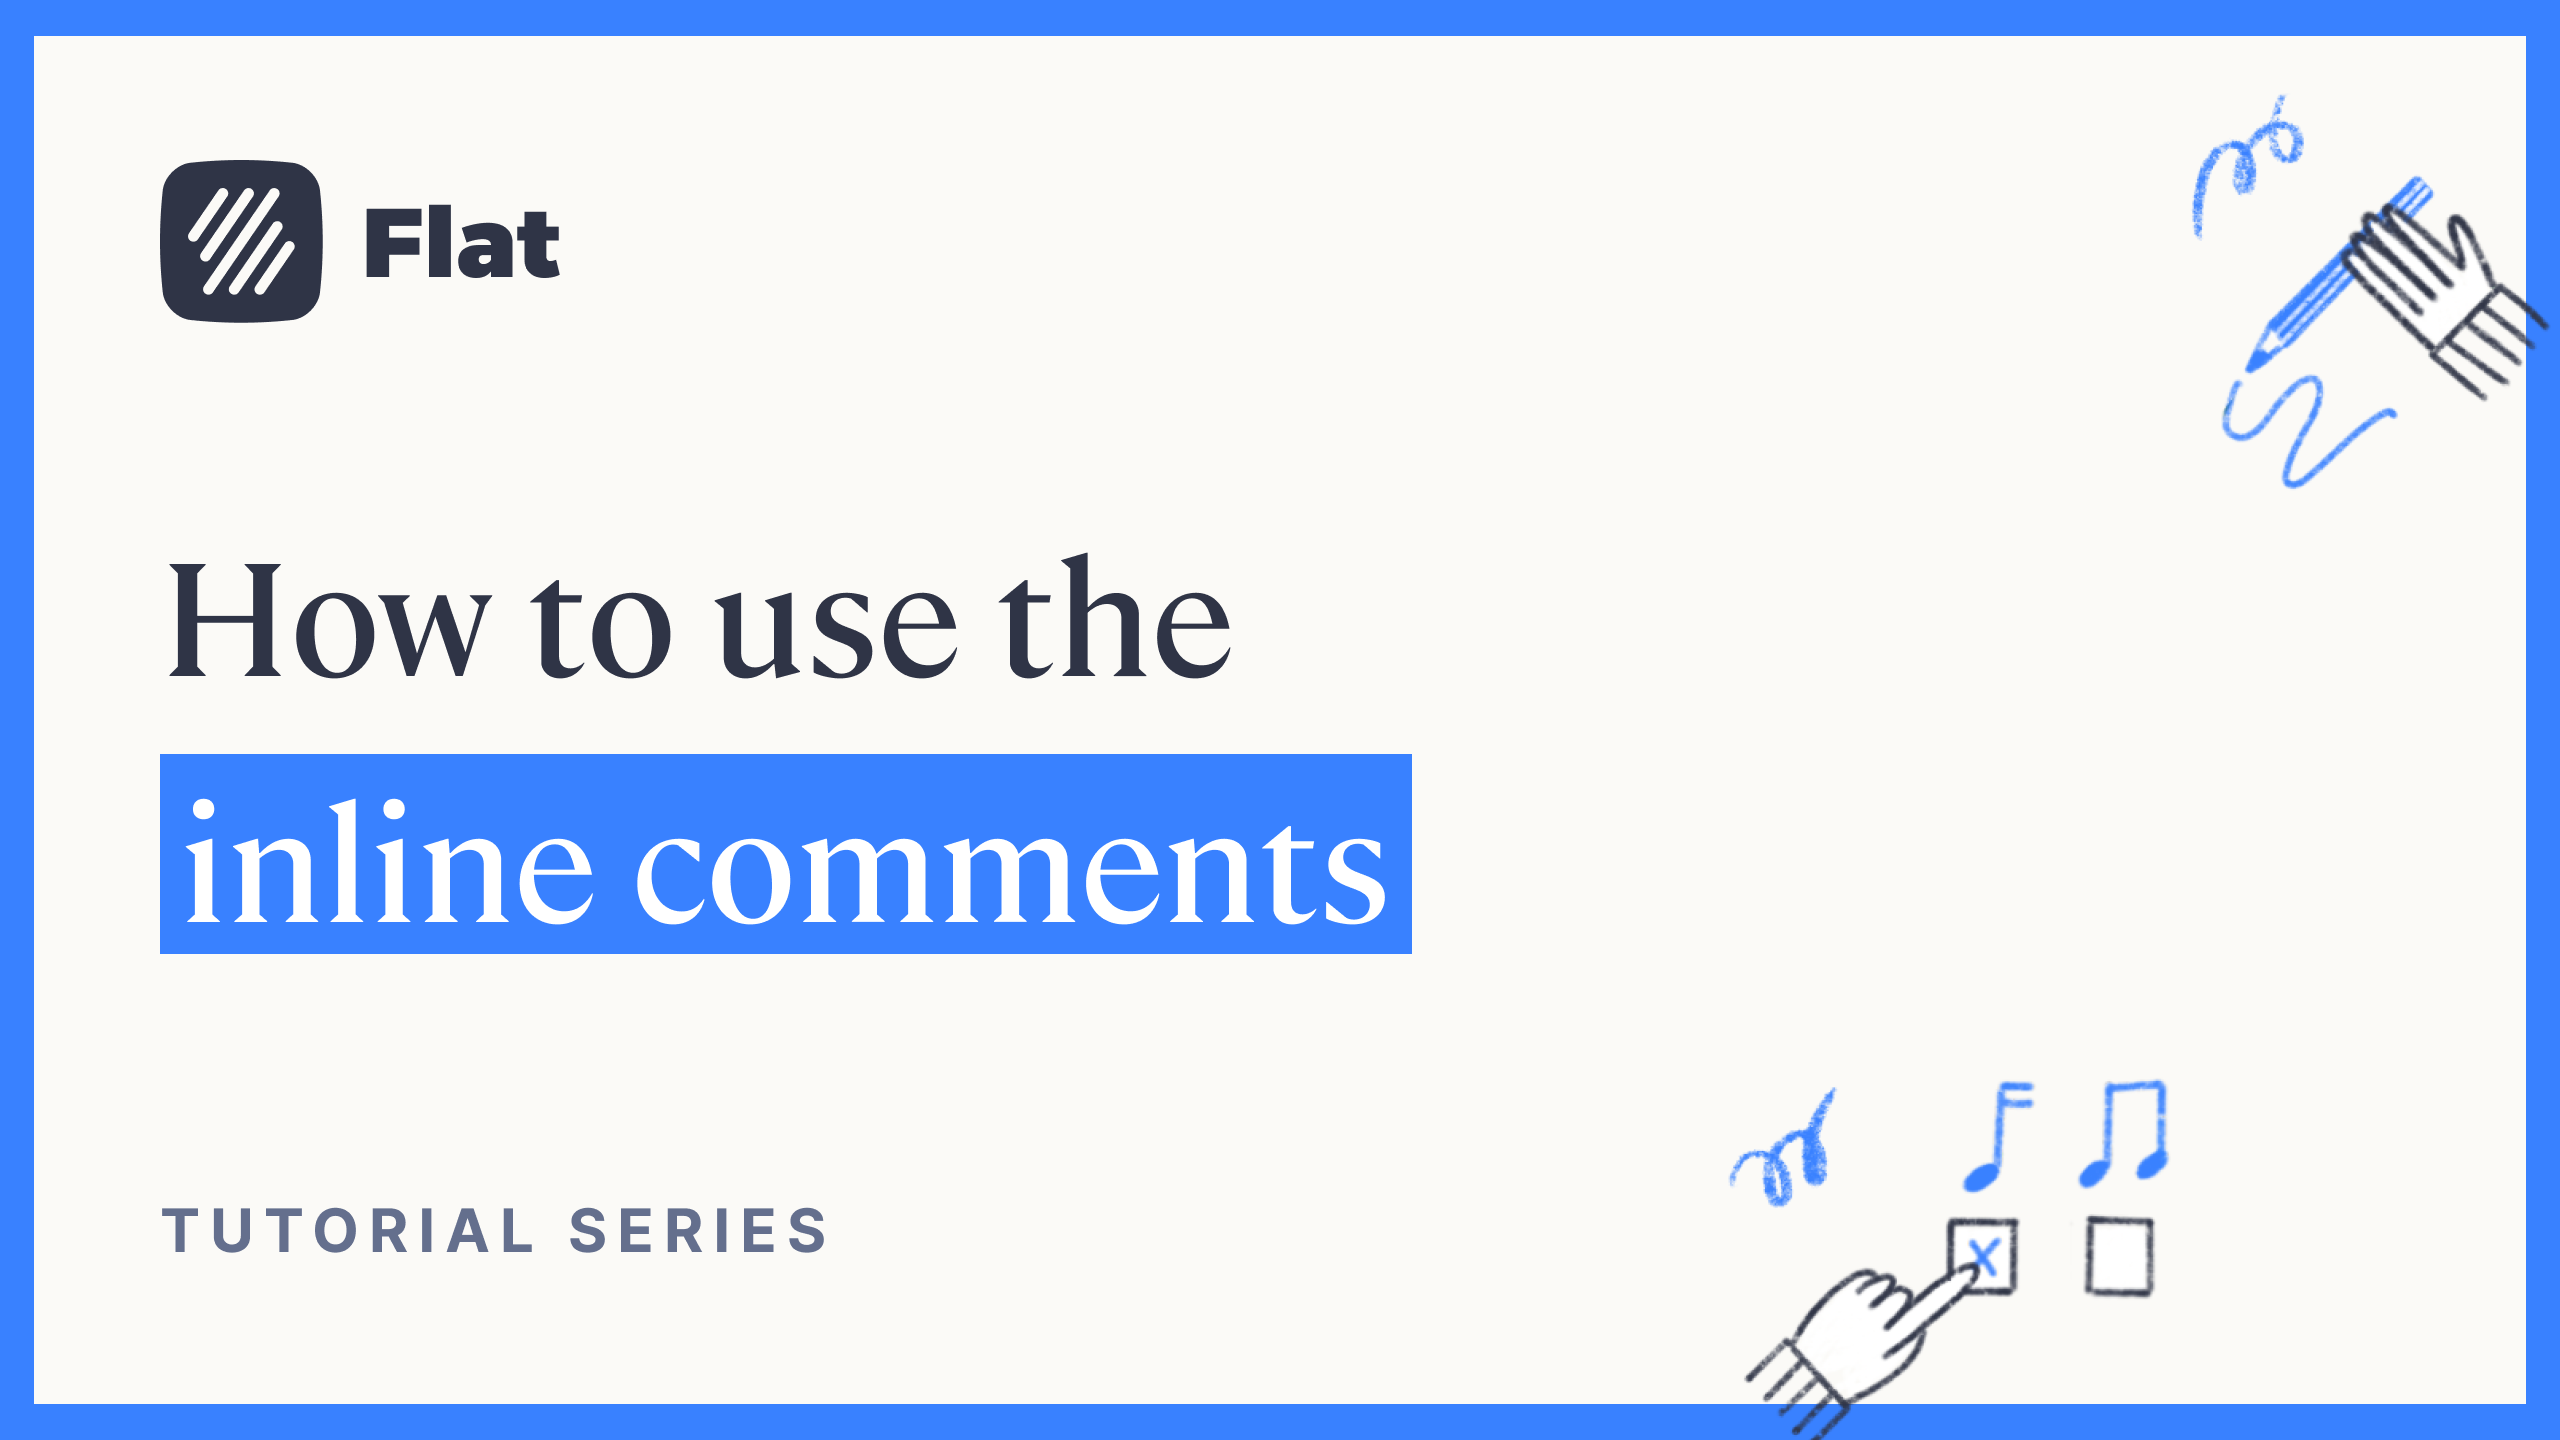 How to use the inline comments on Flat